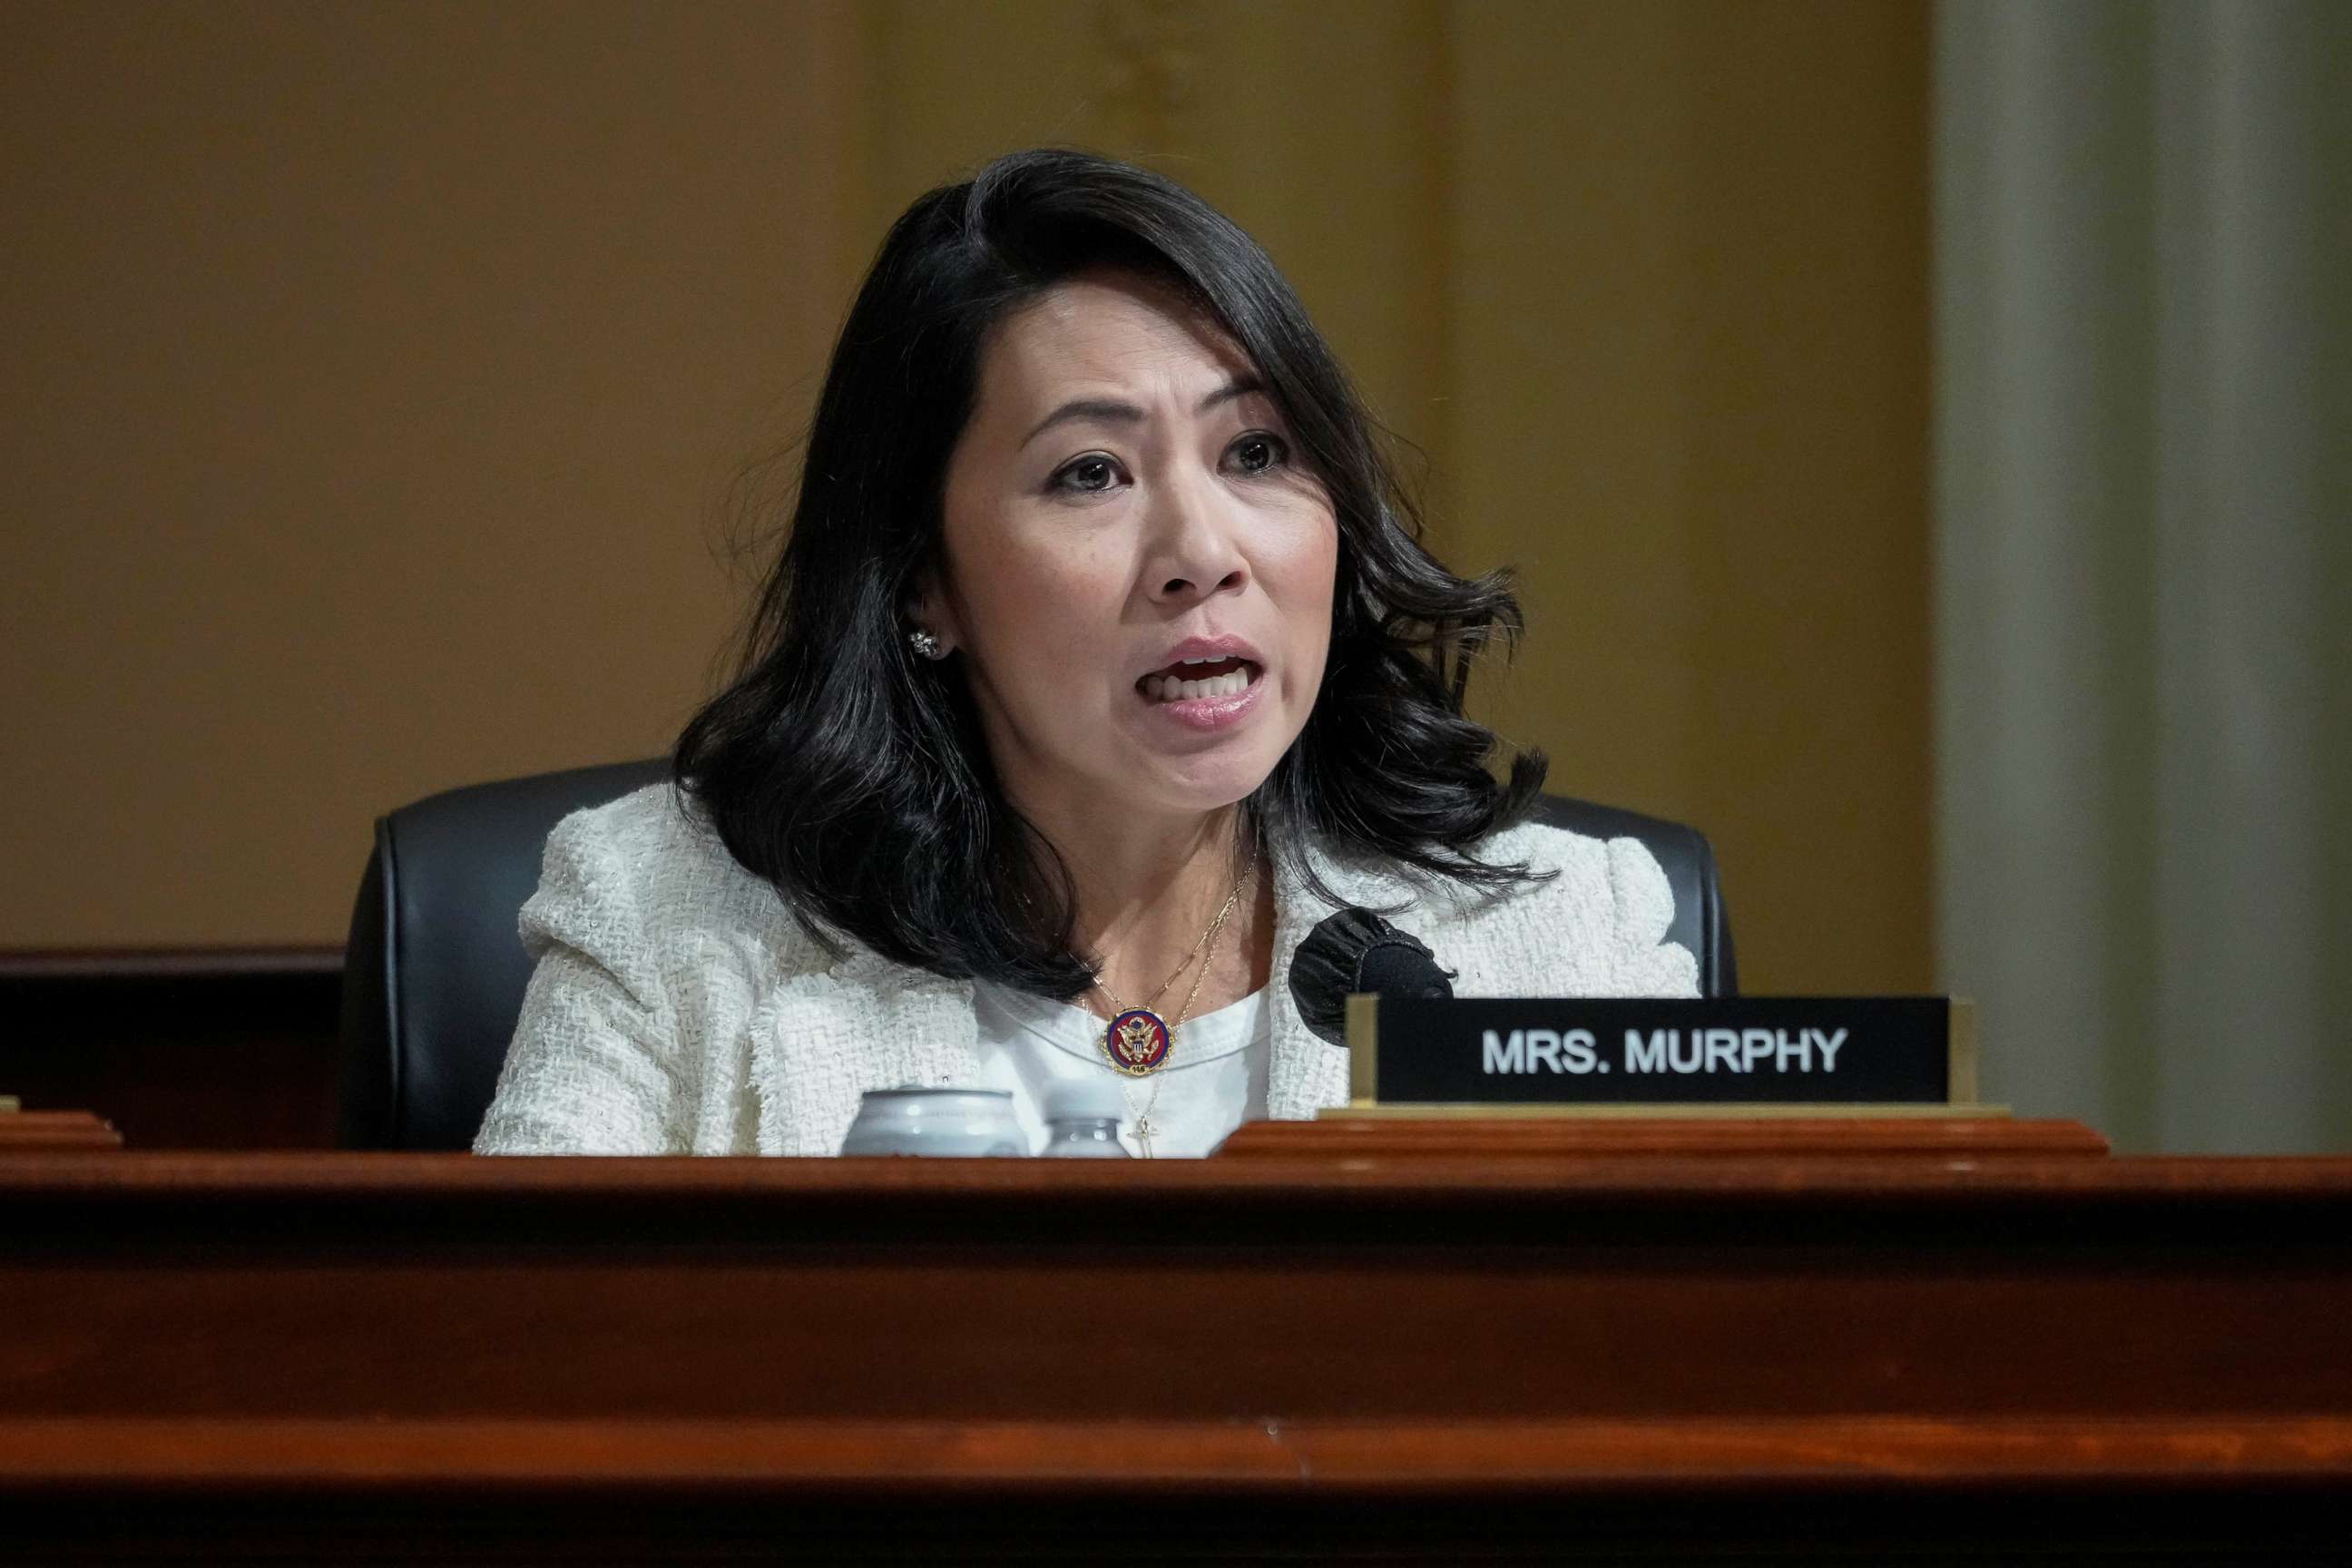 PHOTO: Rep. Stephanie Murphy speaks during a meeting on Capitol Hill, March 28, 2022.